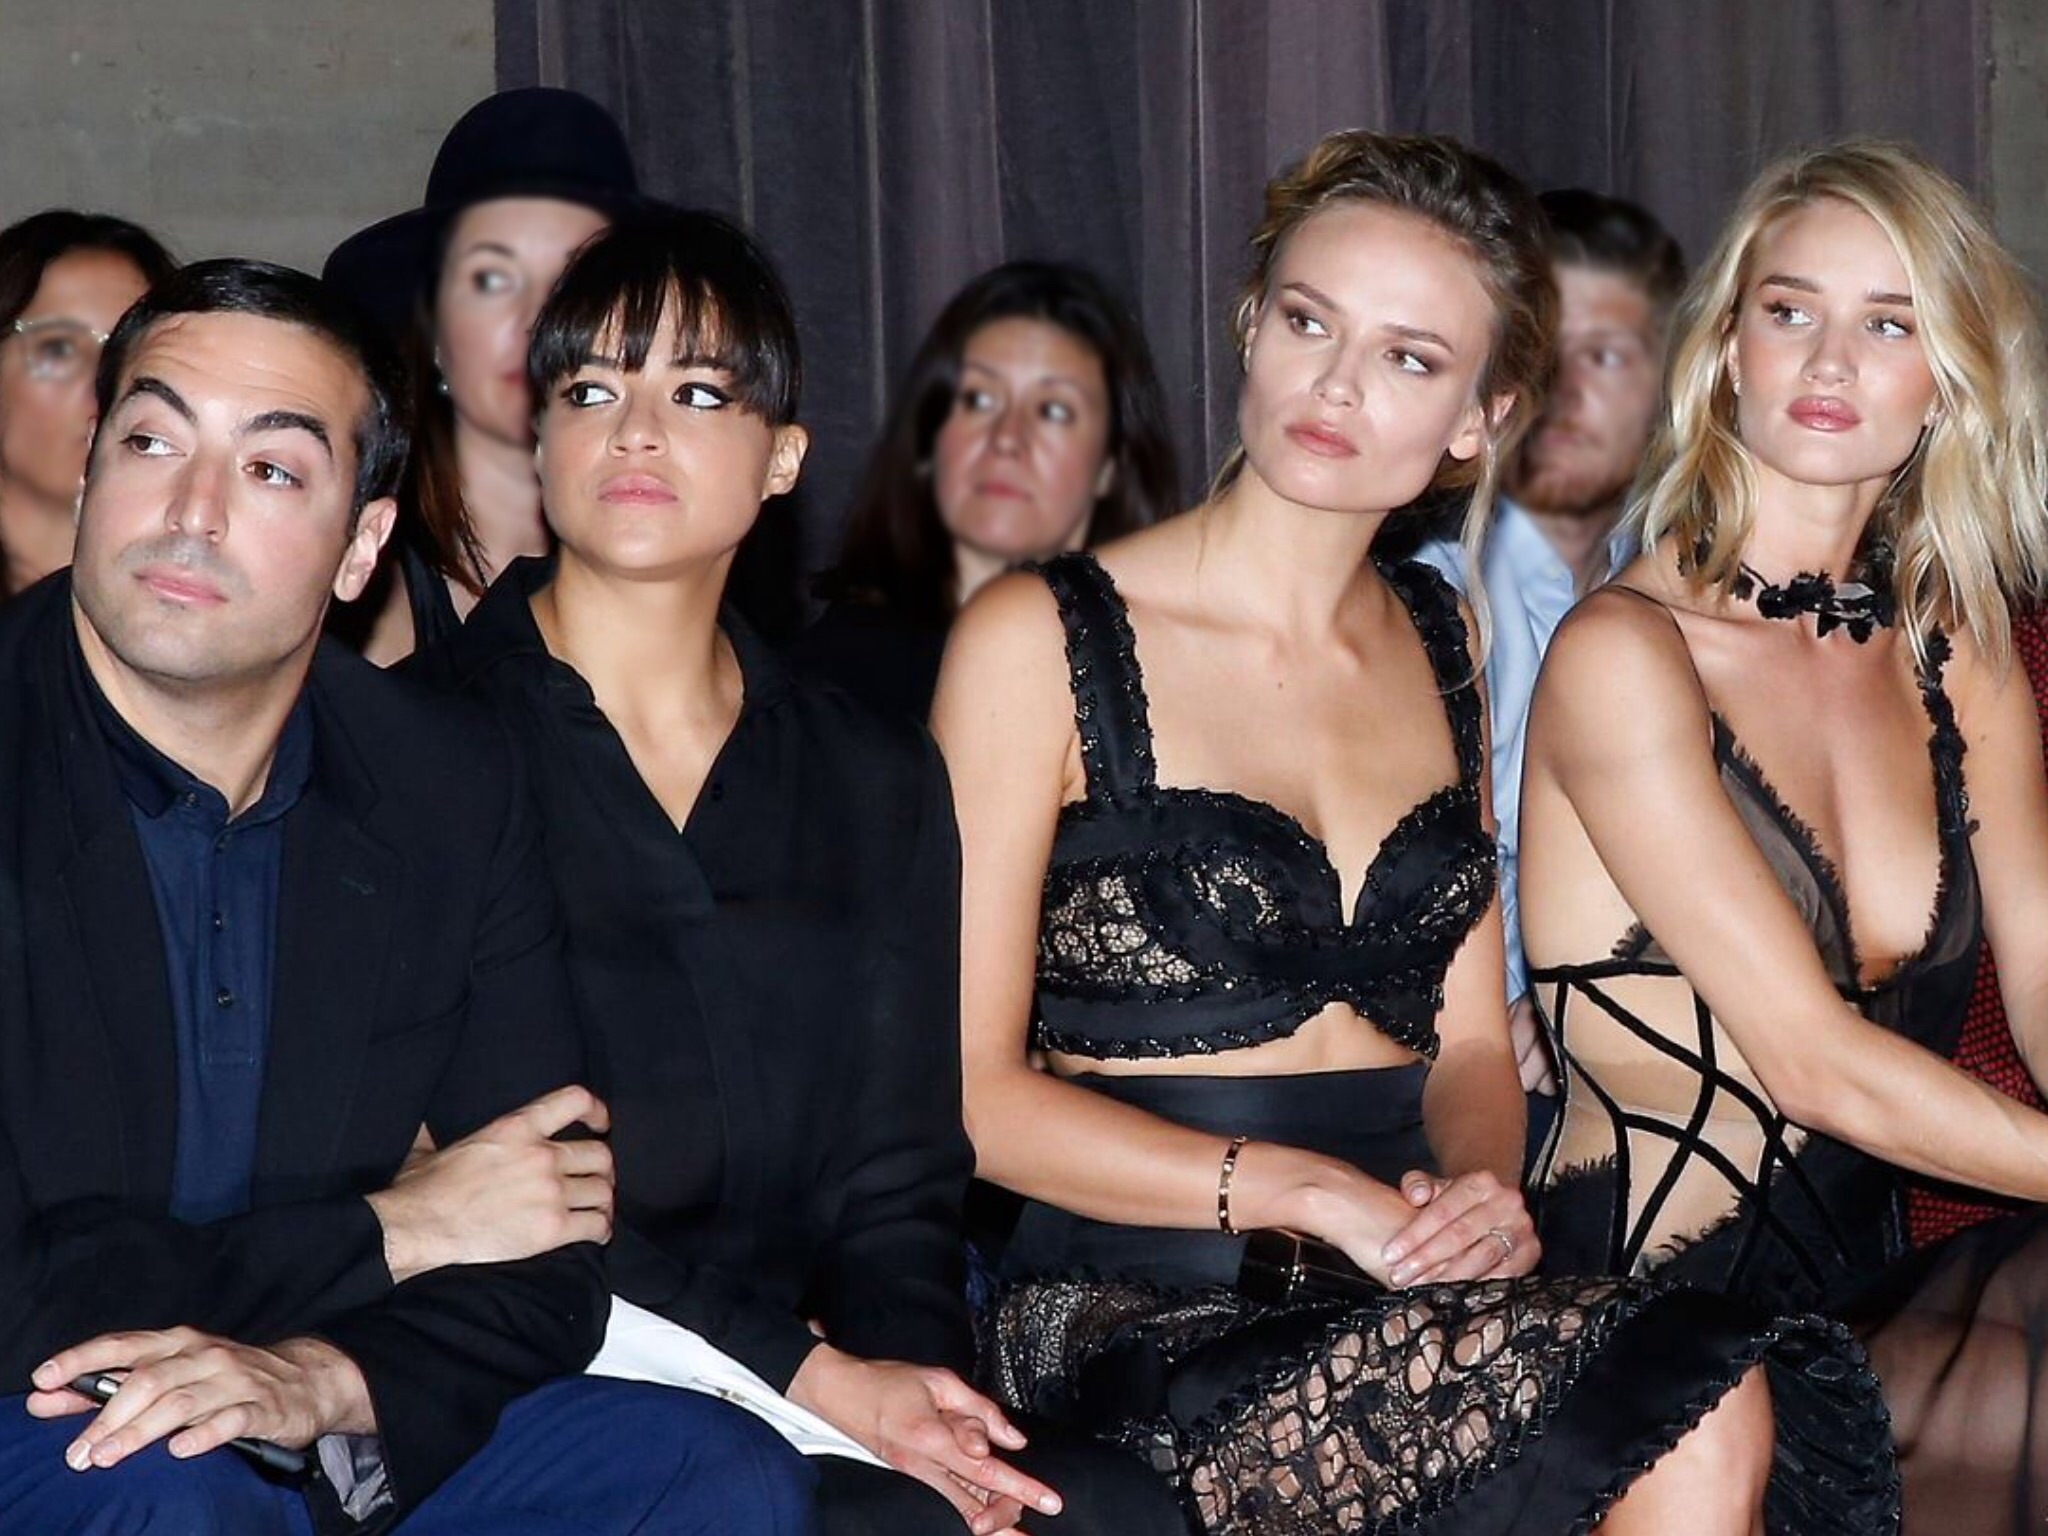 Mohammed Al Turki, Michelle Rodriguez, Natasha Poly and Rosie Huntington-Whiteley attend the Atelier Versace show as part of Paris Fashion Week Haute Couture Fall/Winter 2015/2016 on July 5, 2015 in Paris, France.